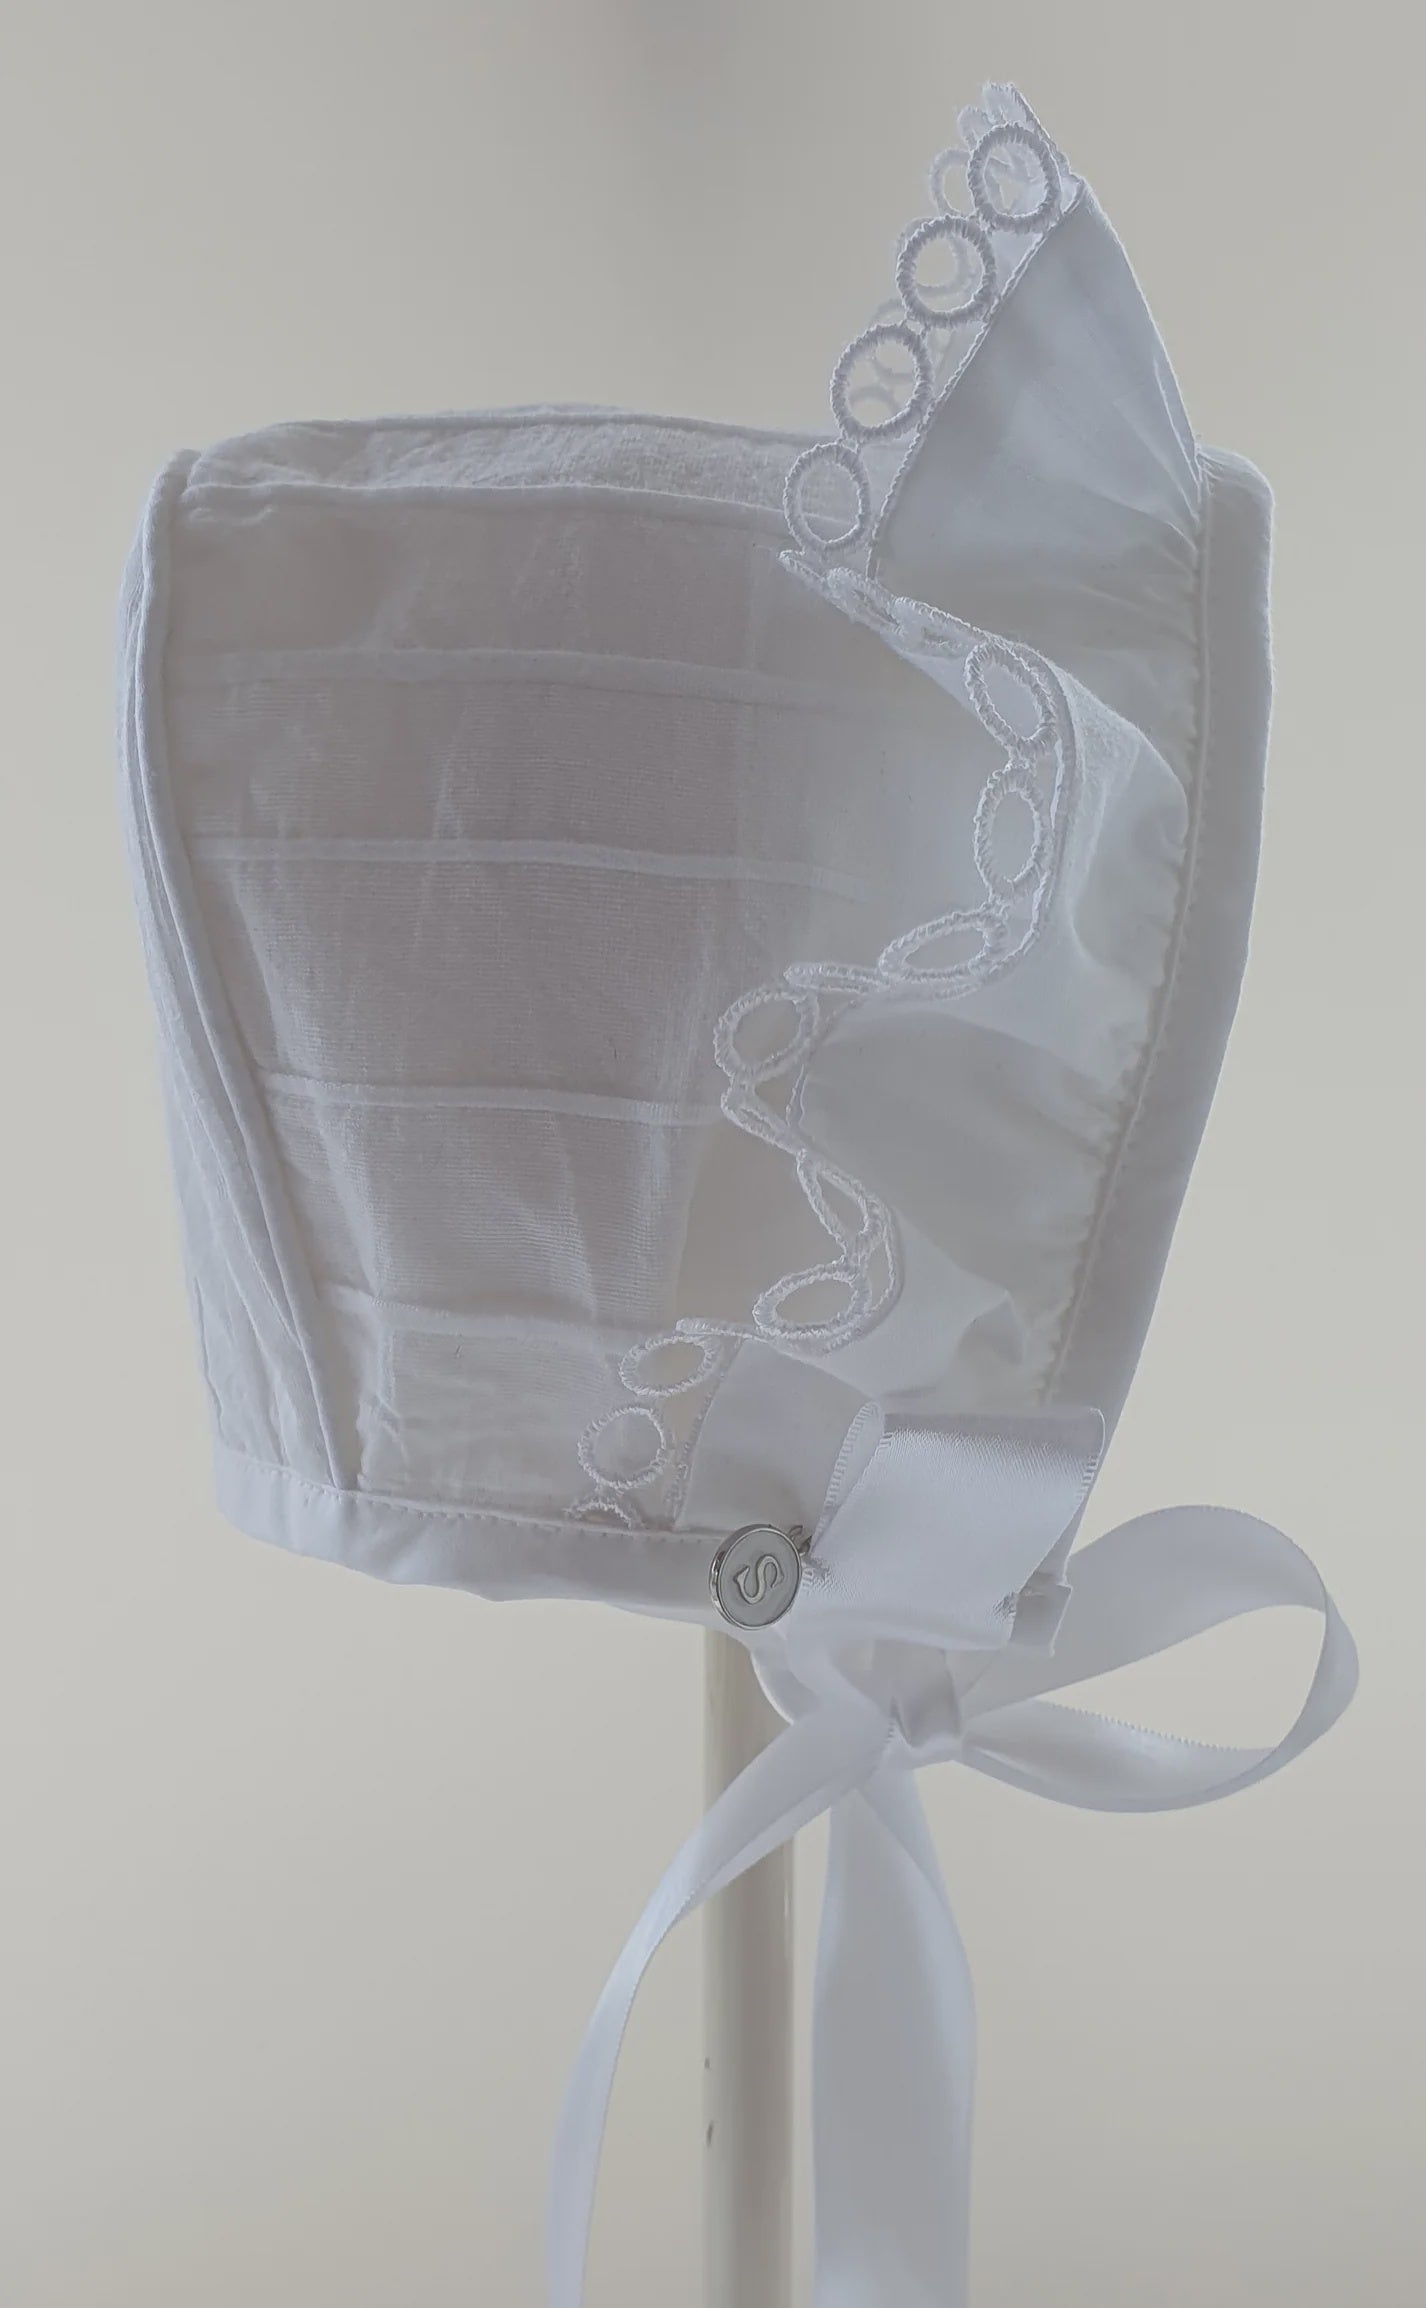 Small Dreams White Pleated Frill Bonnet